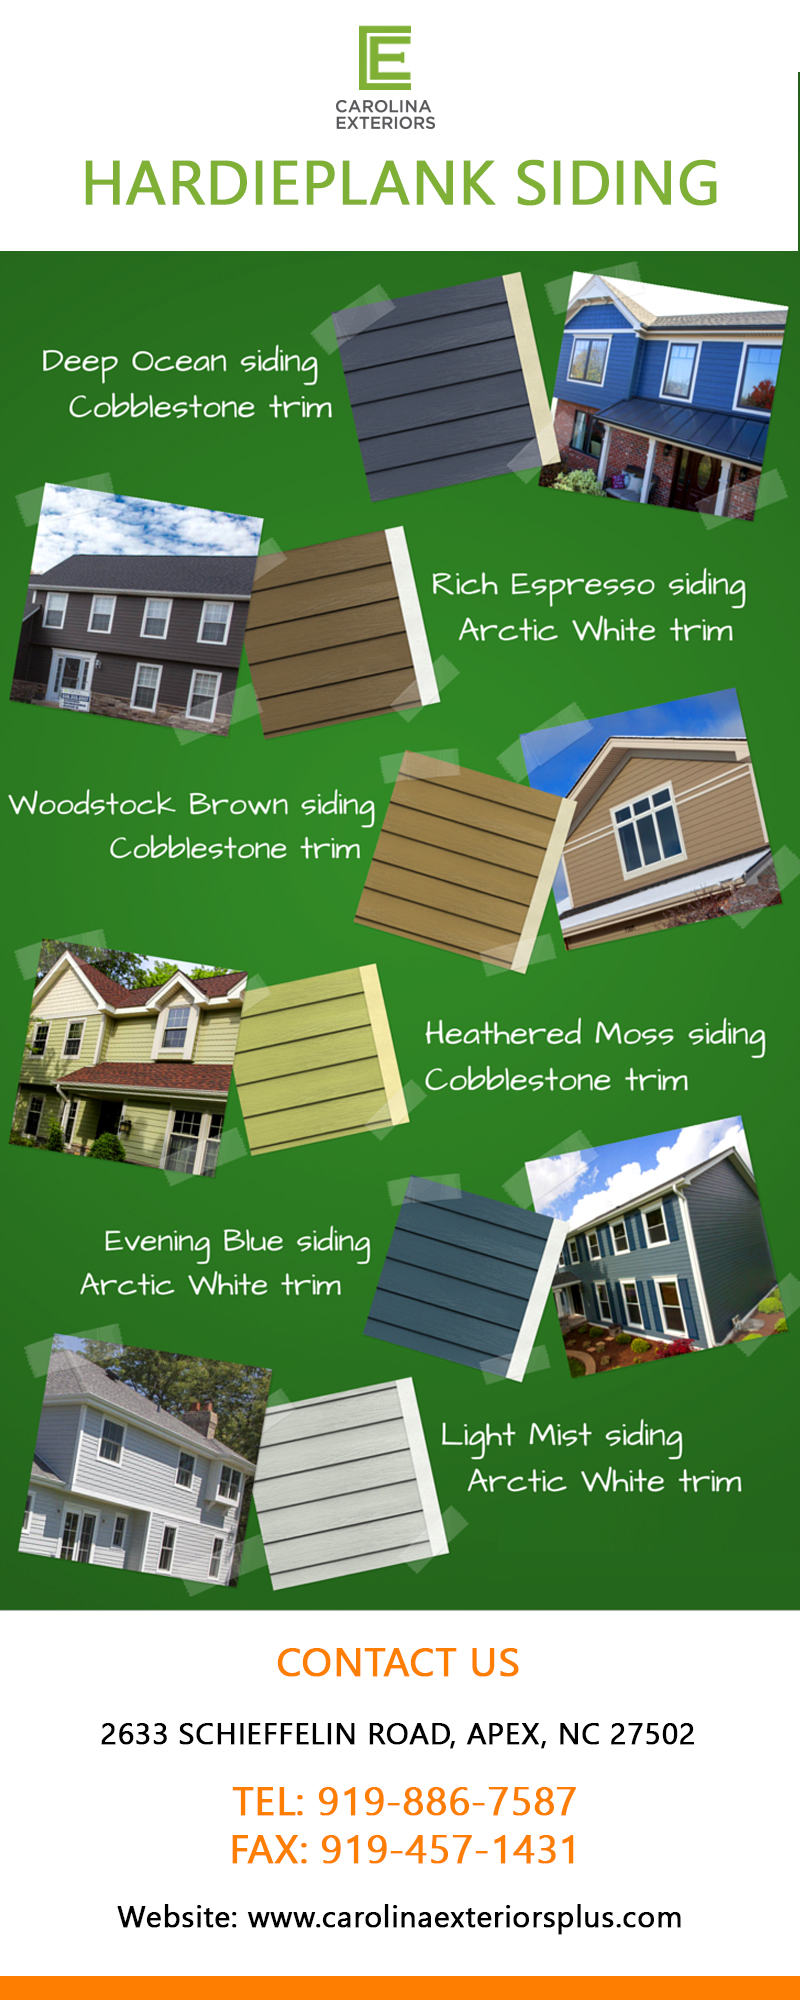 Hardieplank Siding Hardie Plank Siding Colors is a specialty service offered by Carolina Exterior Plus. Carolina Exteriors is the Raleigh Triangle area’s trusted partner for James .
http://www.carolinaexteriorsplus.com/ by carolinaexteriorsplus